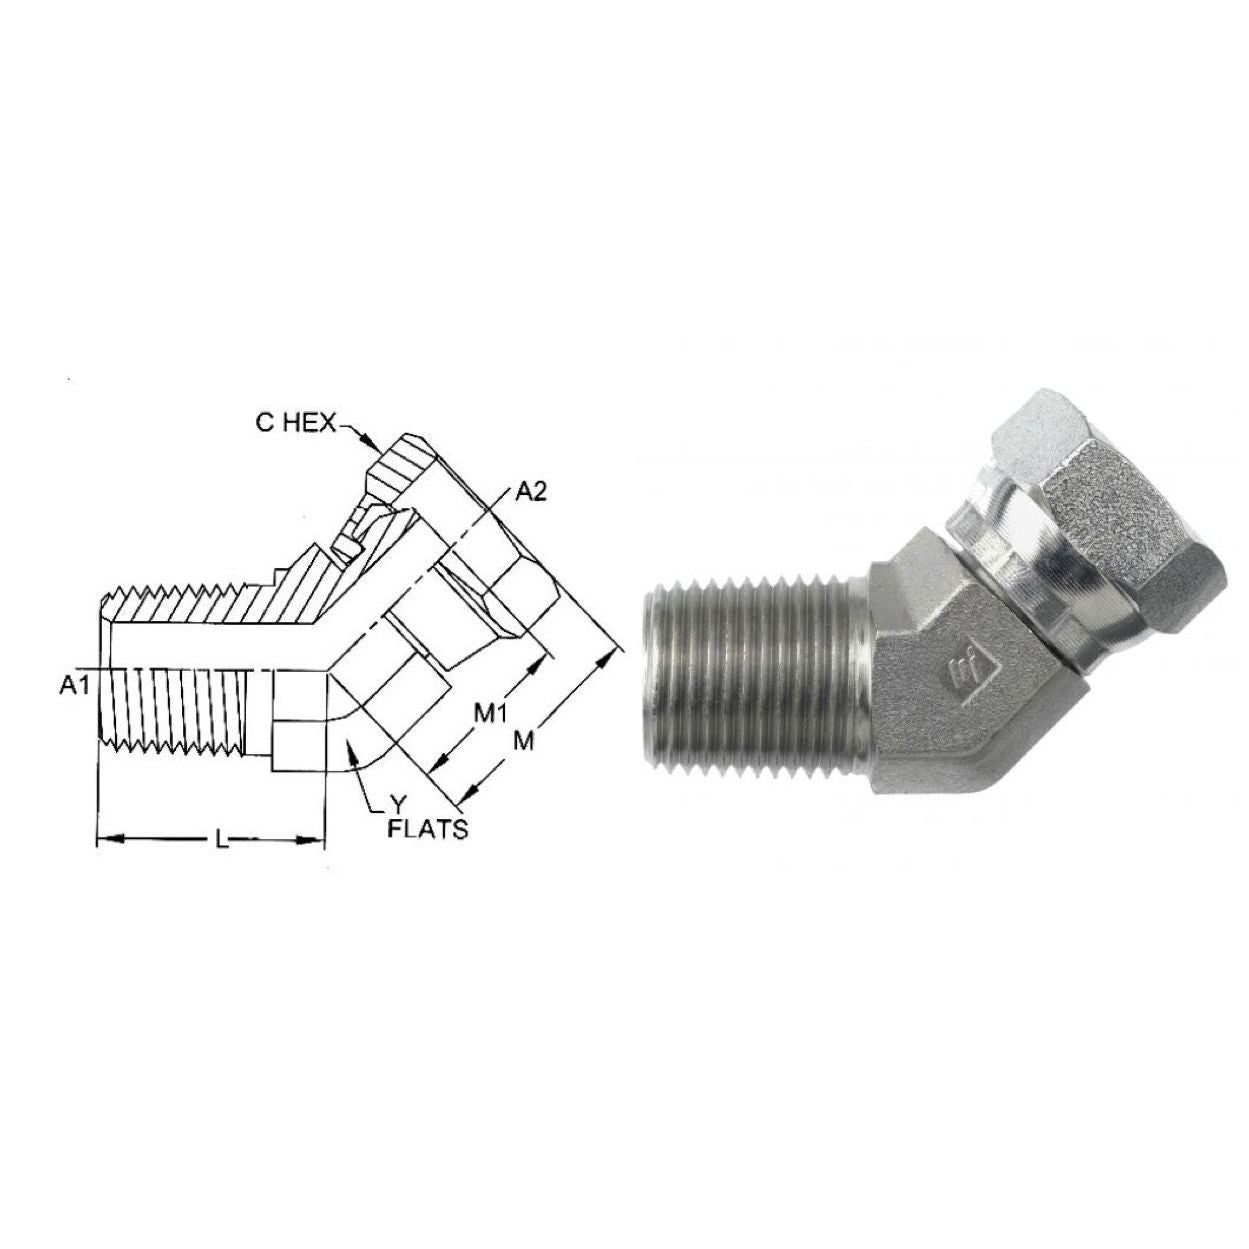 1503-08-08-SS : OneHydraulics 45-Degree Elbow, 0.5 (1/2) Male NPT x 0.5 (1/2) Female NPT Swivel, Stainless Steel, 4200psi